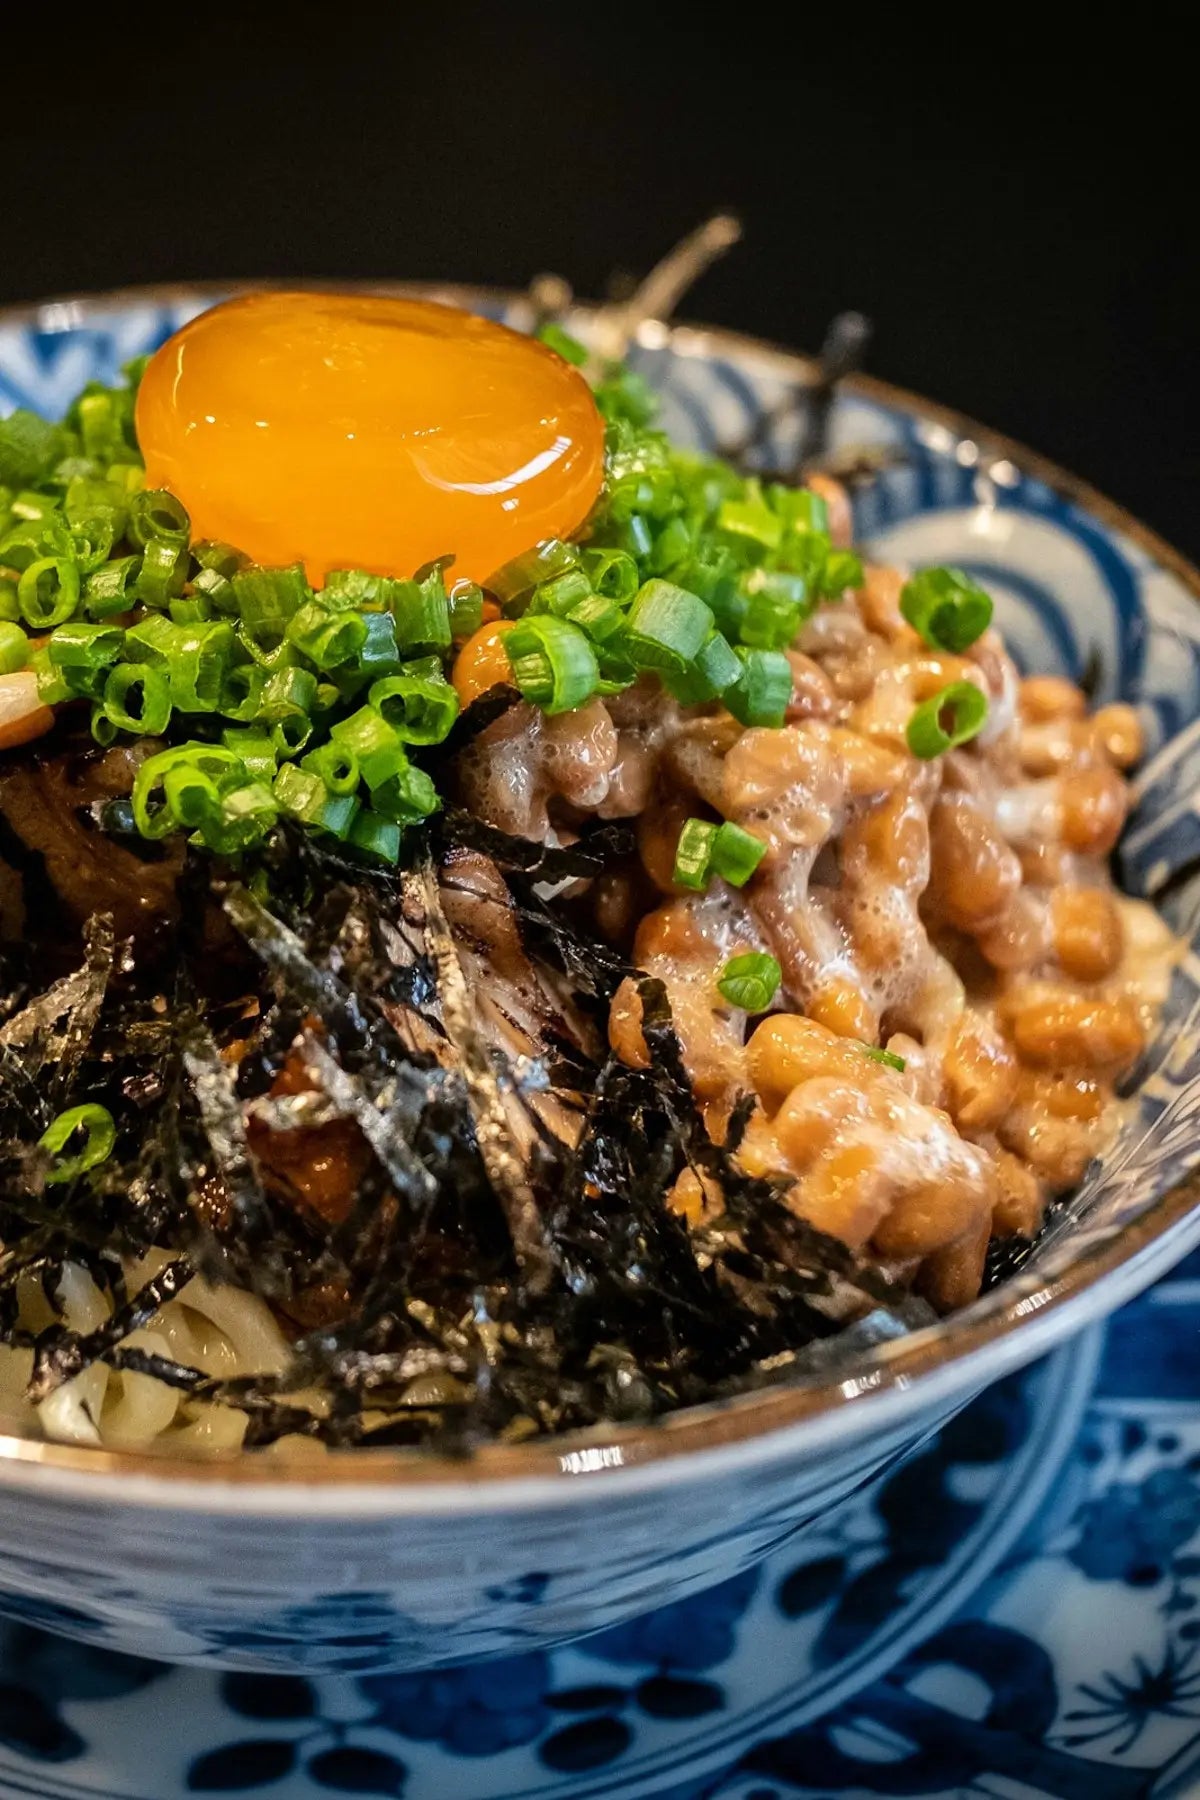 Mazesoba Natto Recipe using our freeze-dried, organic natto and organic spices, served in a Japanese blue and white bowl and topped with an egg yolk from pasture-raised hens.